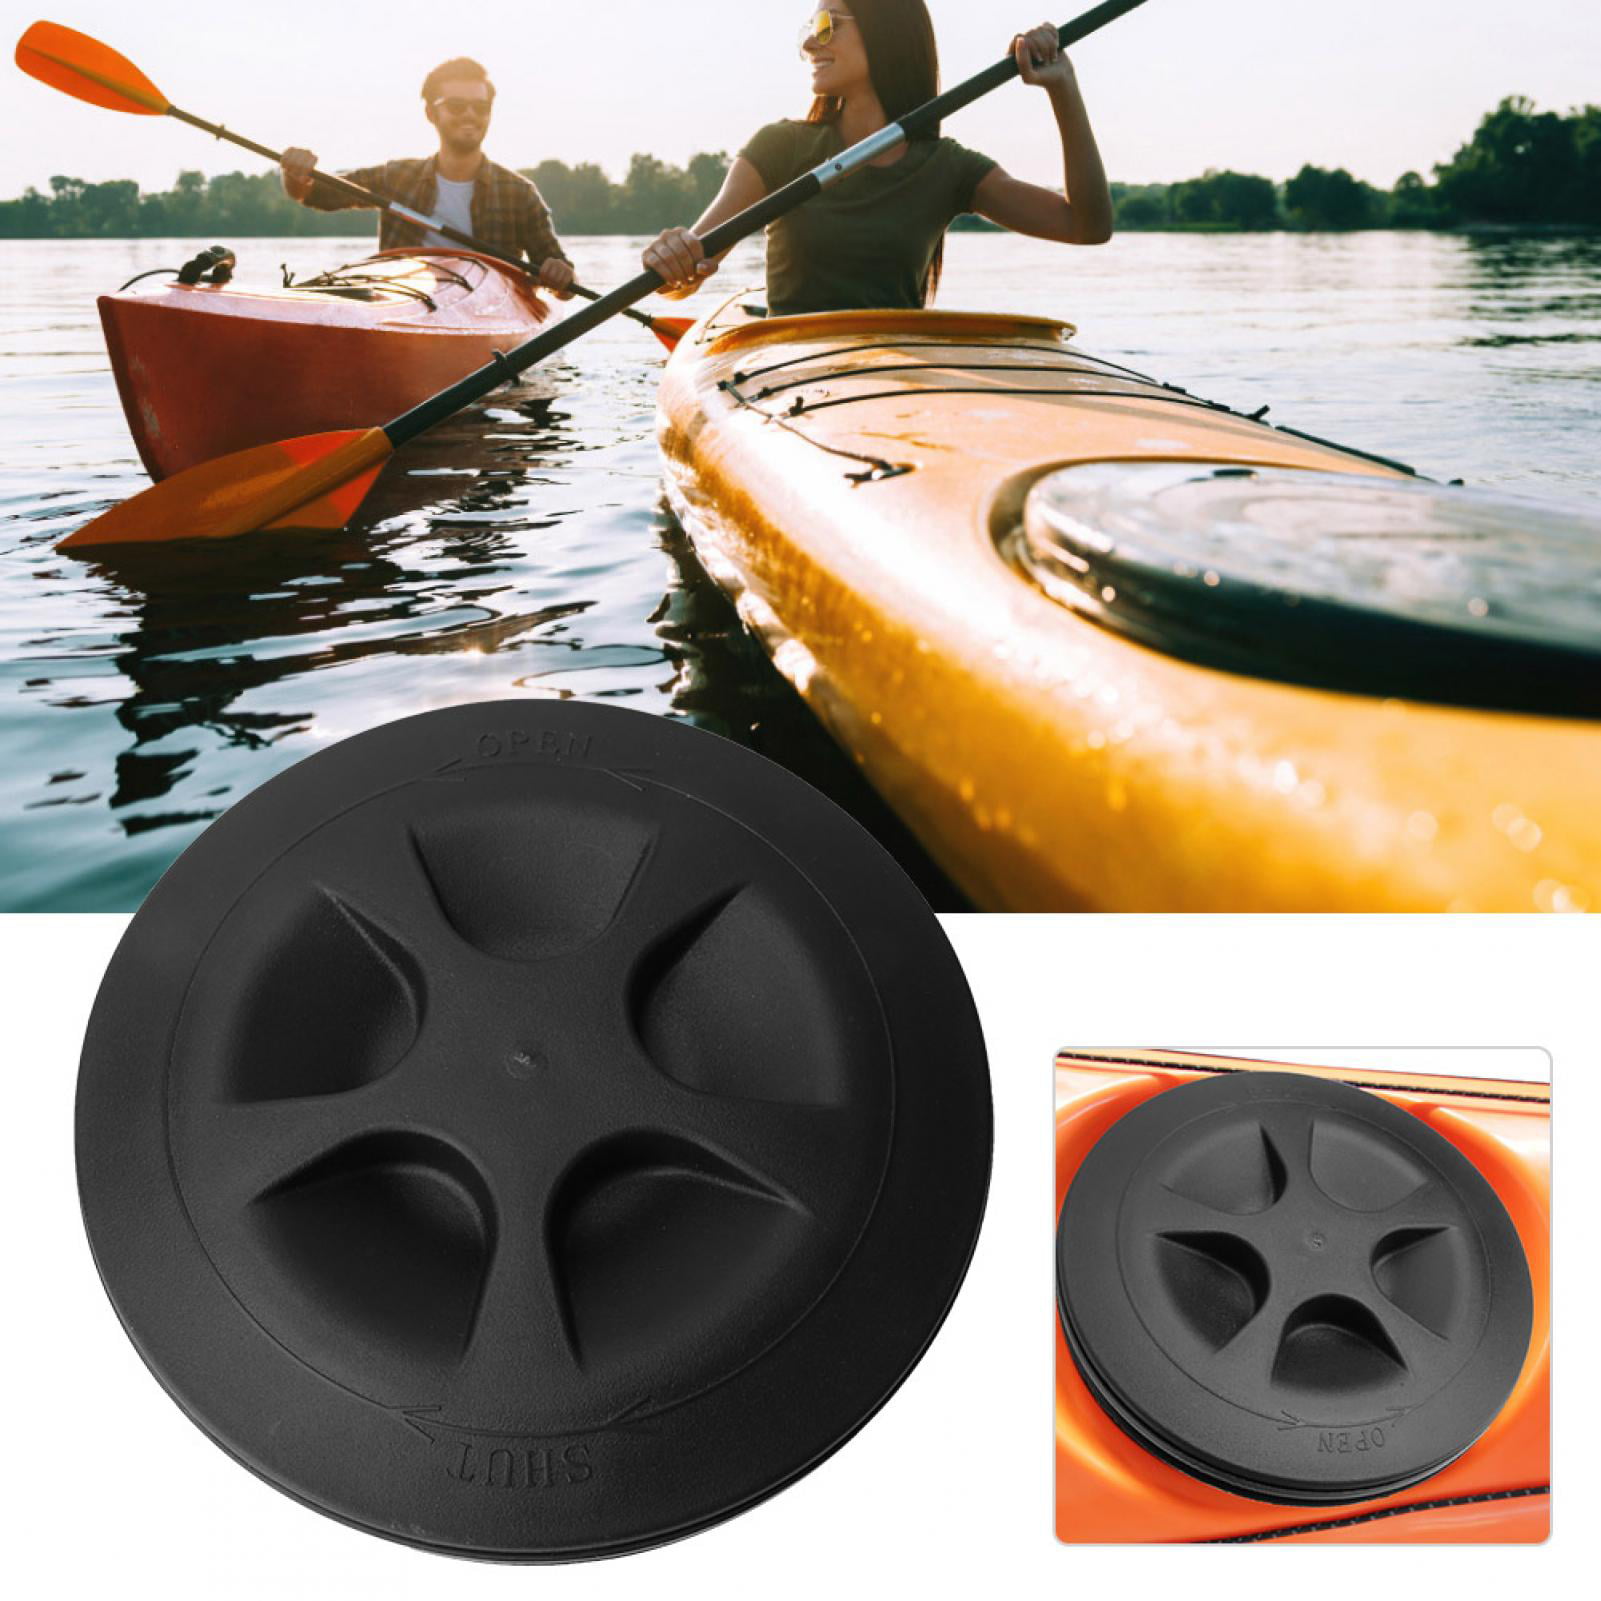 Plastic Kayak Accessories Hatch Cover Kayak For Boat Durable Marine Cover BT3 